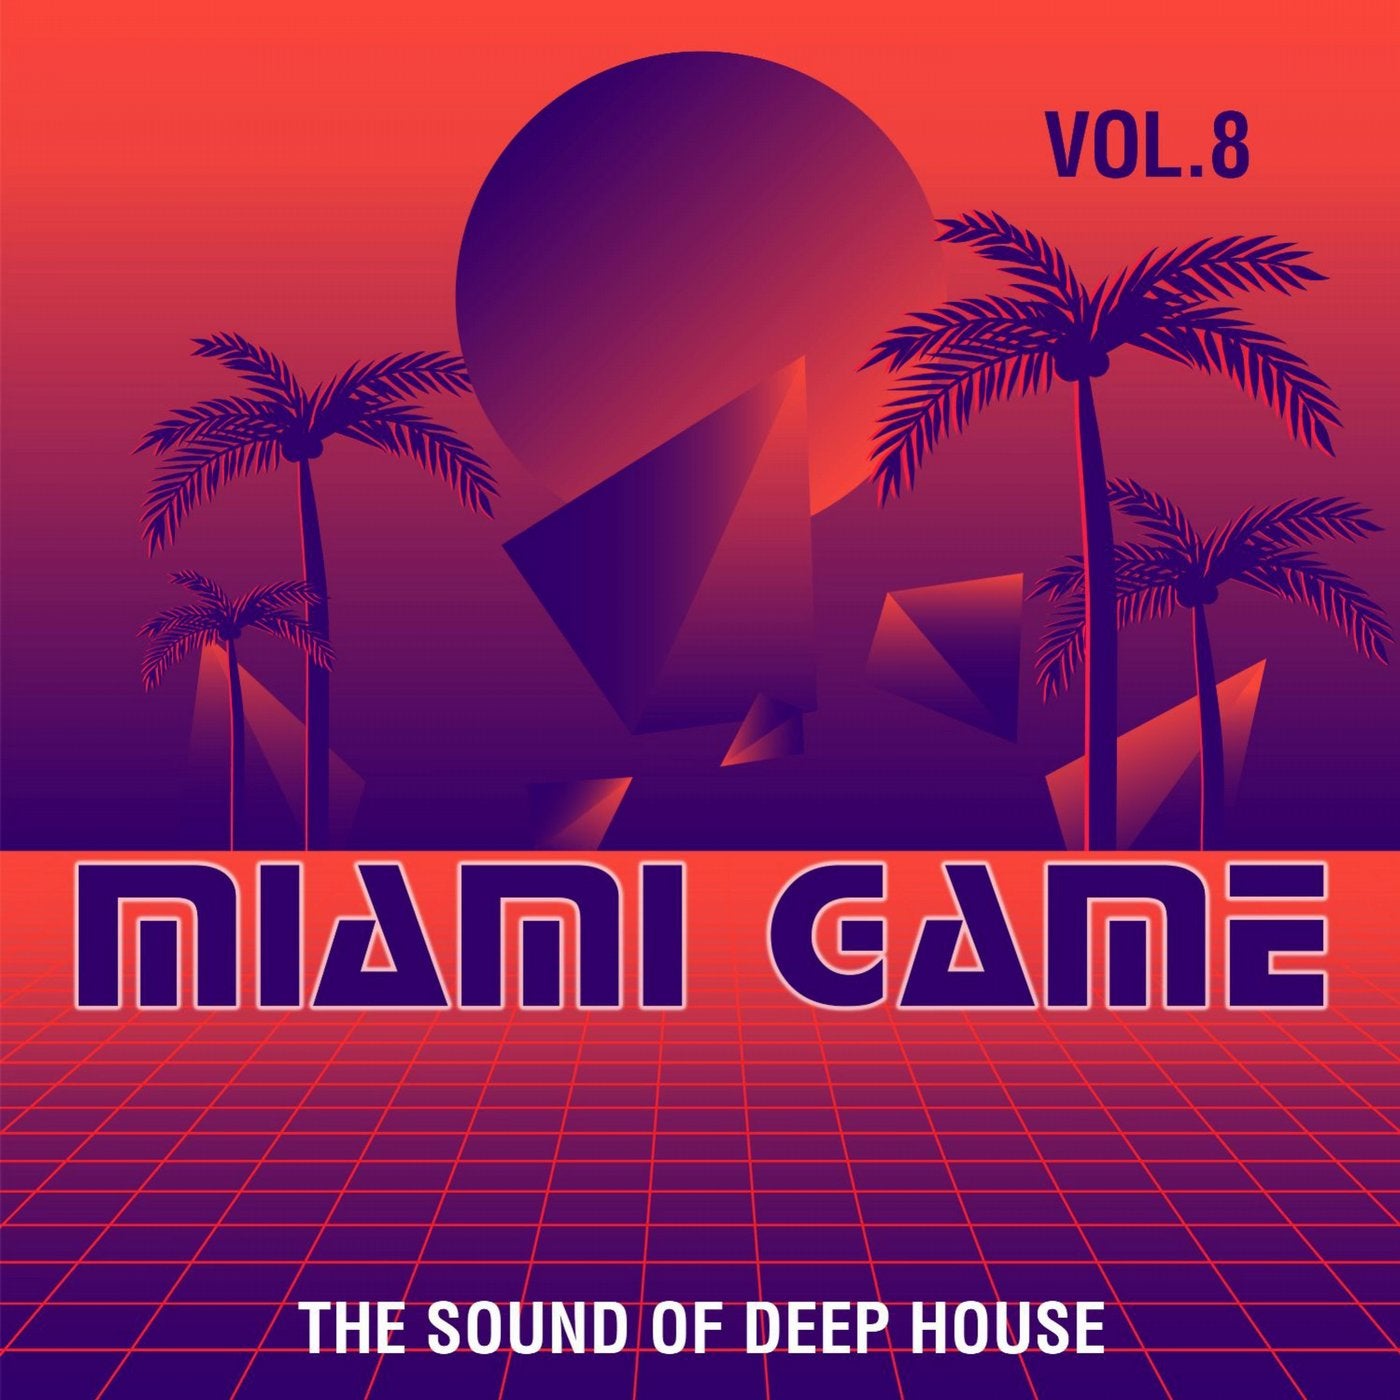 Miami Game, Vol. 8 (The Sound of Deep House)